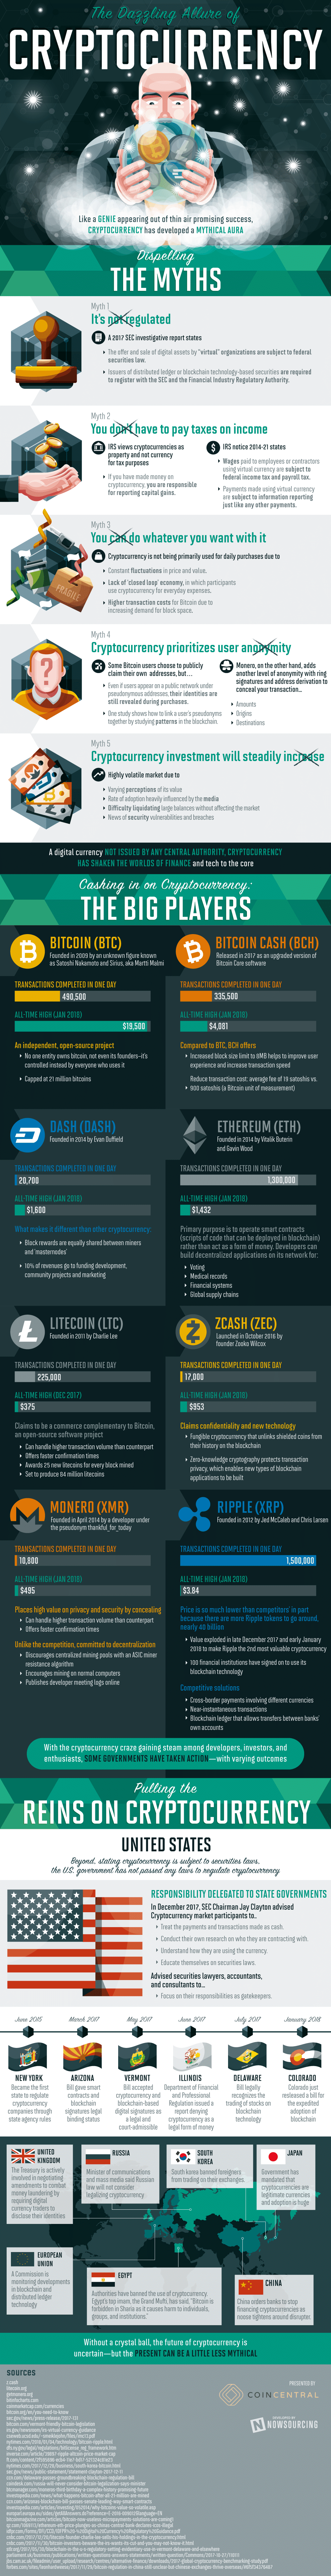 infographic Dispelling the Myths of the Cryptocurrency World